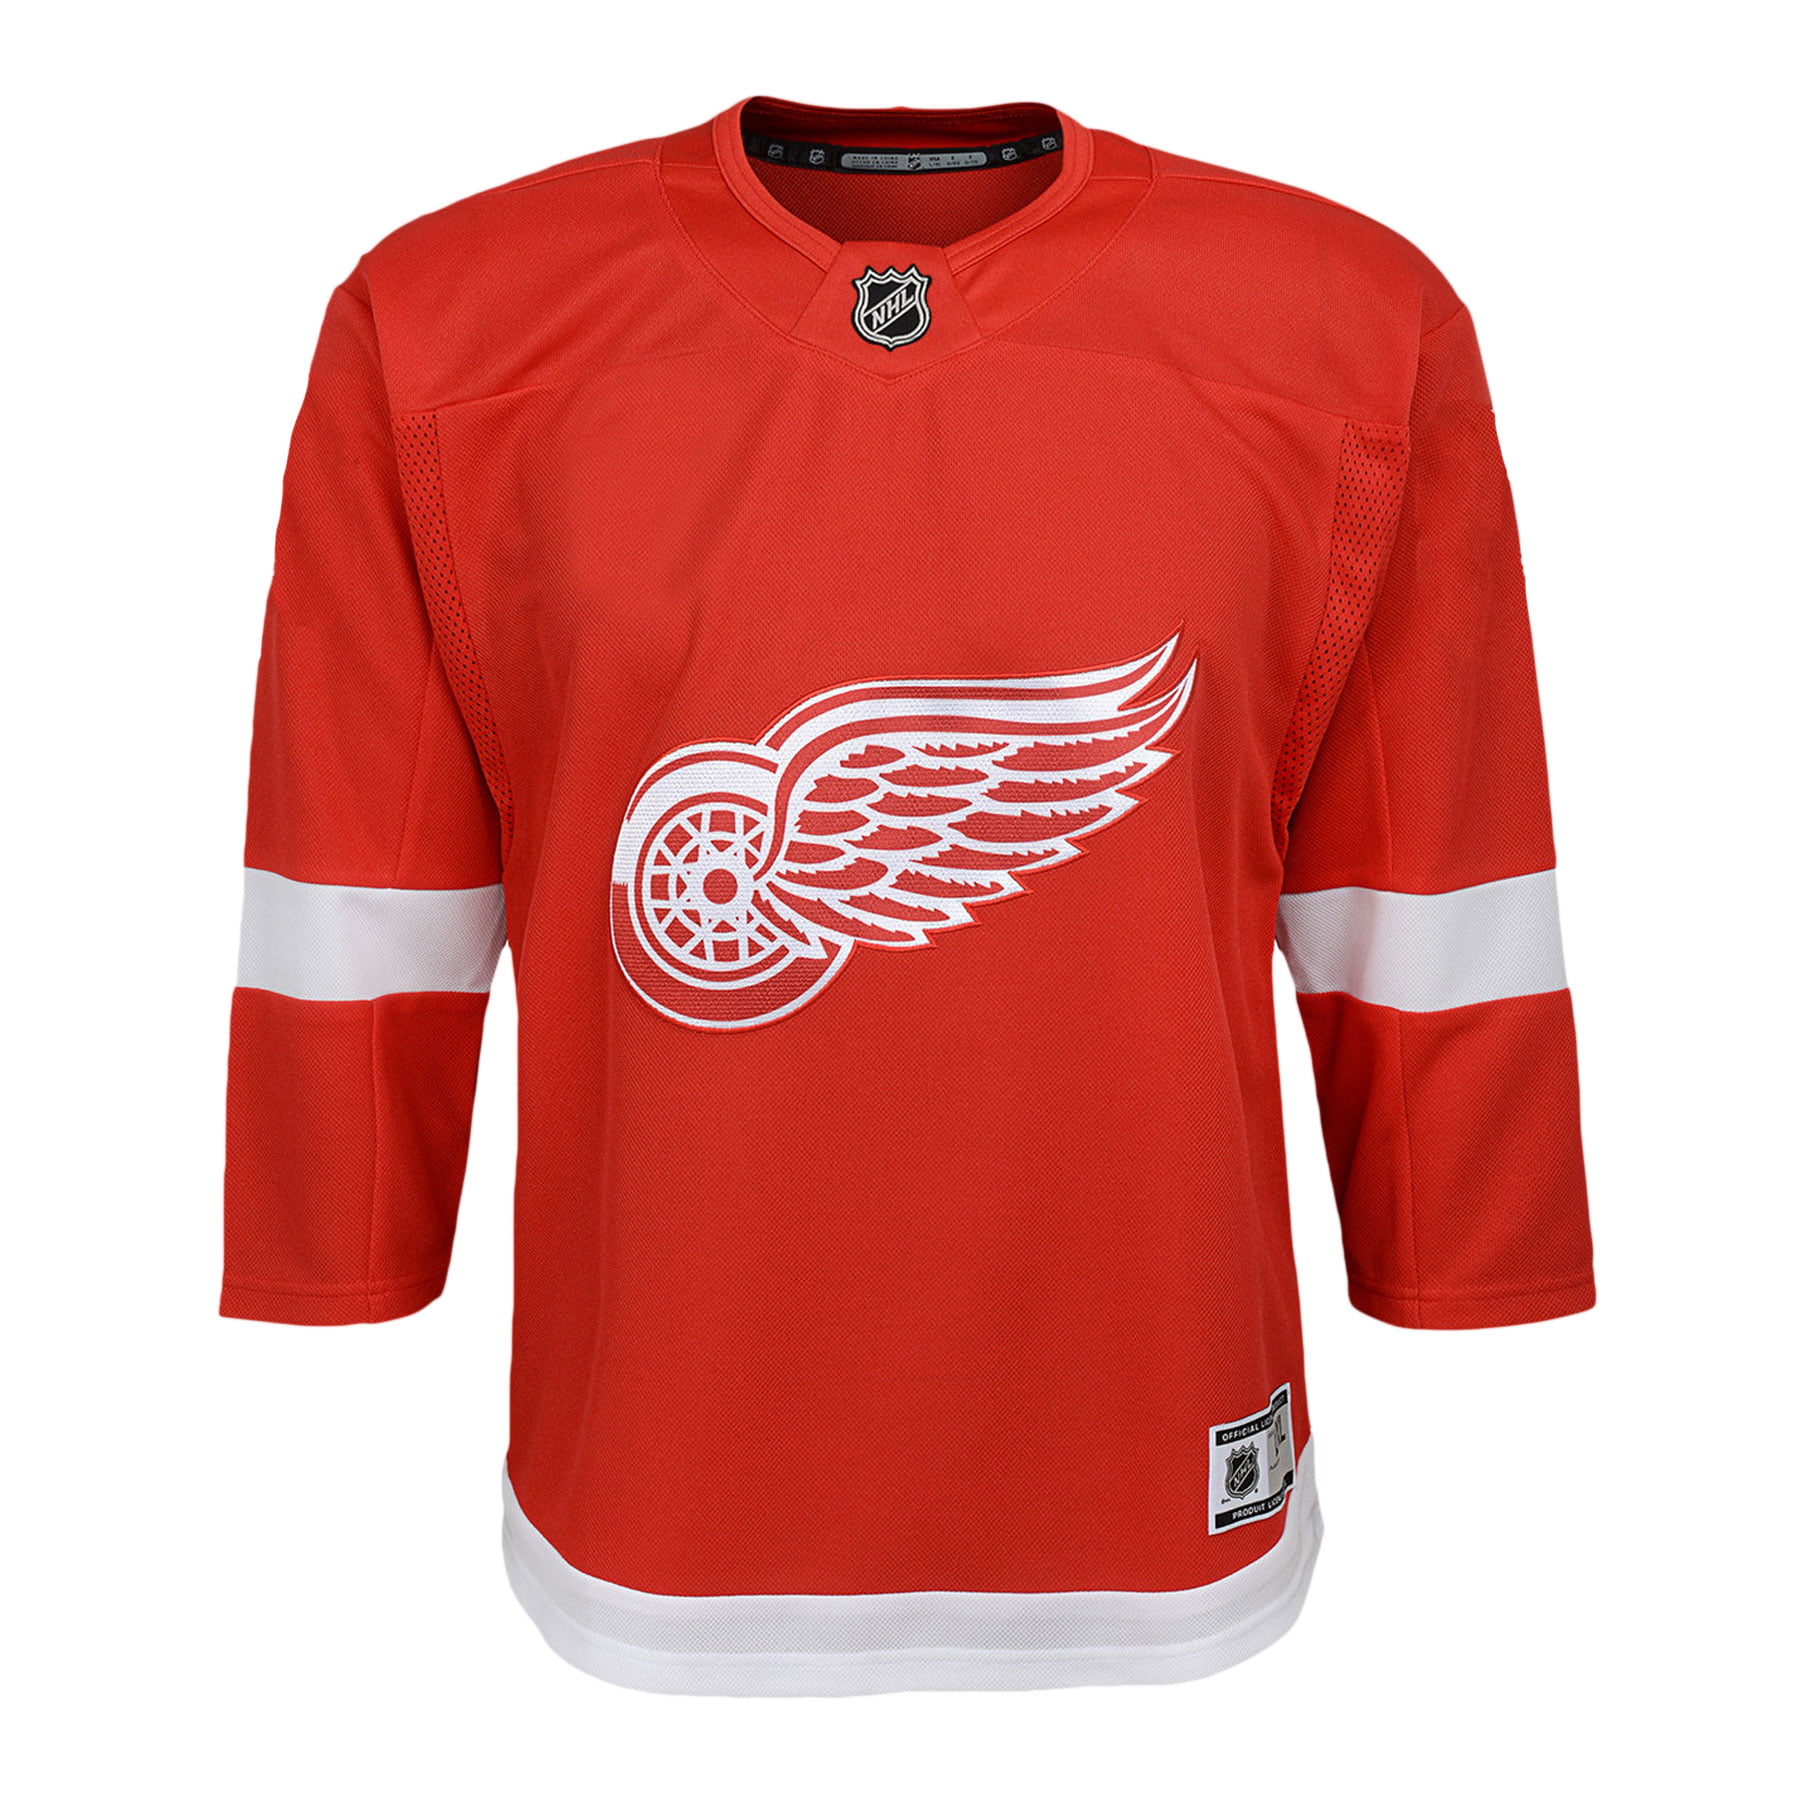 nhl teams with red jerseys